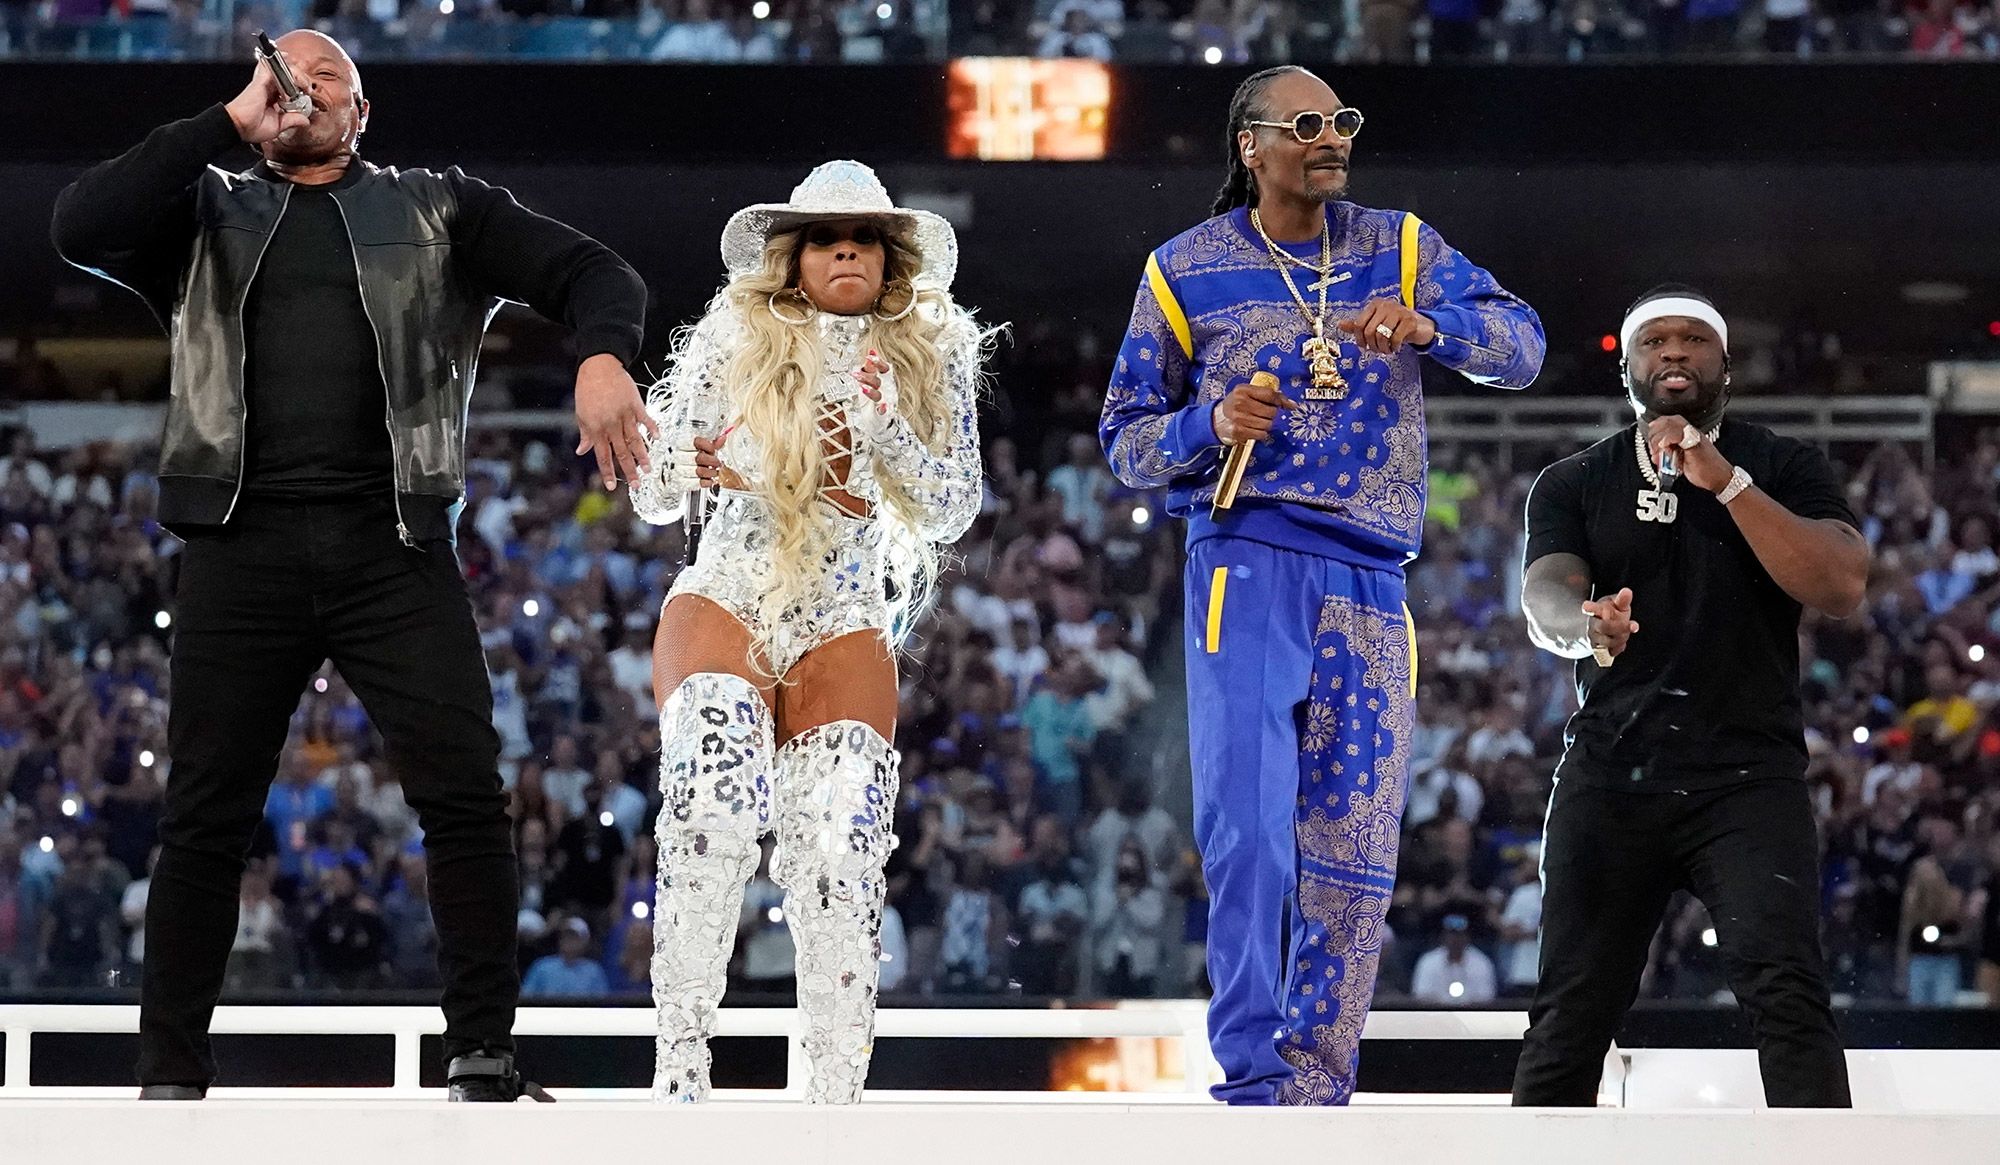 List: Super Bowl Halftime Shows From 2000 to Now – NBC Los Angeles